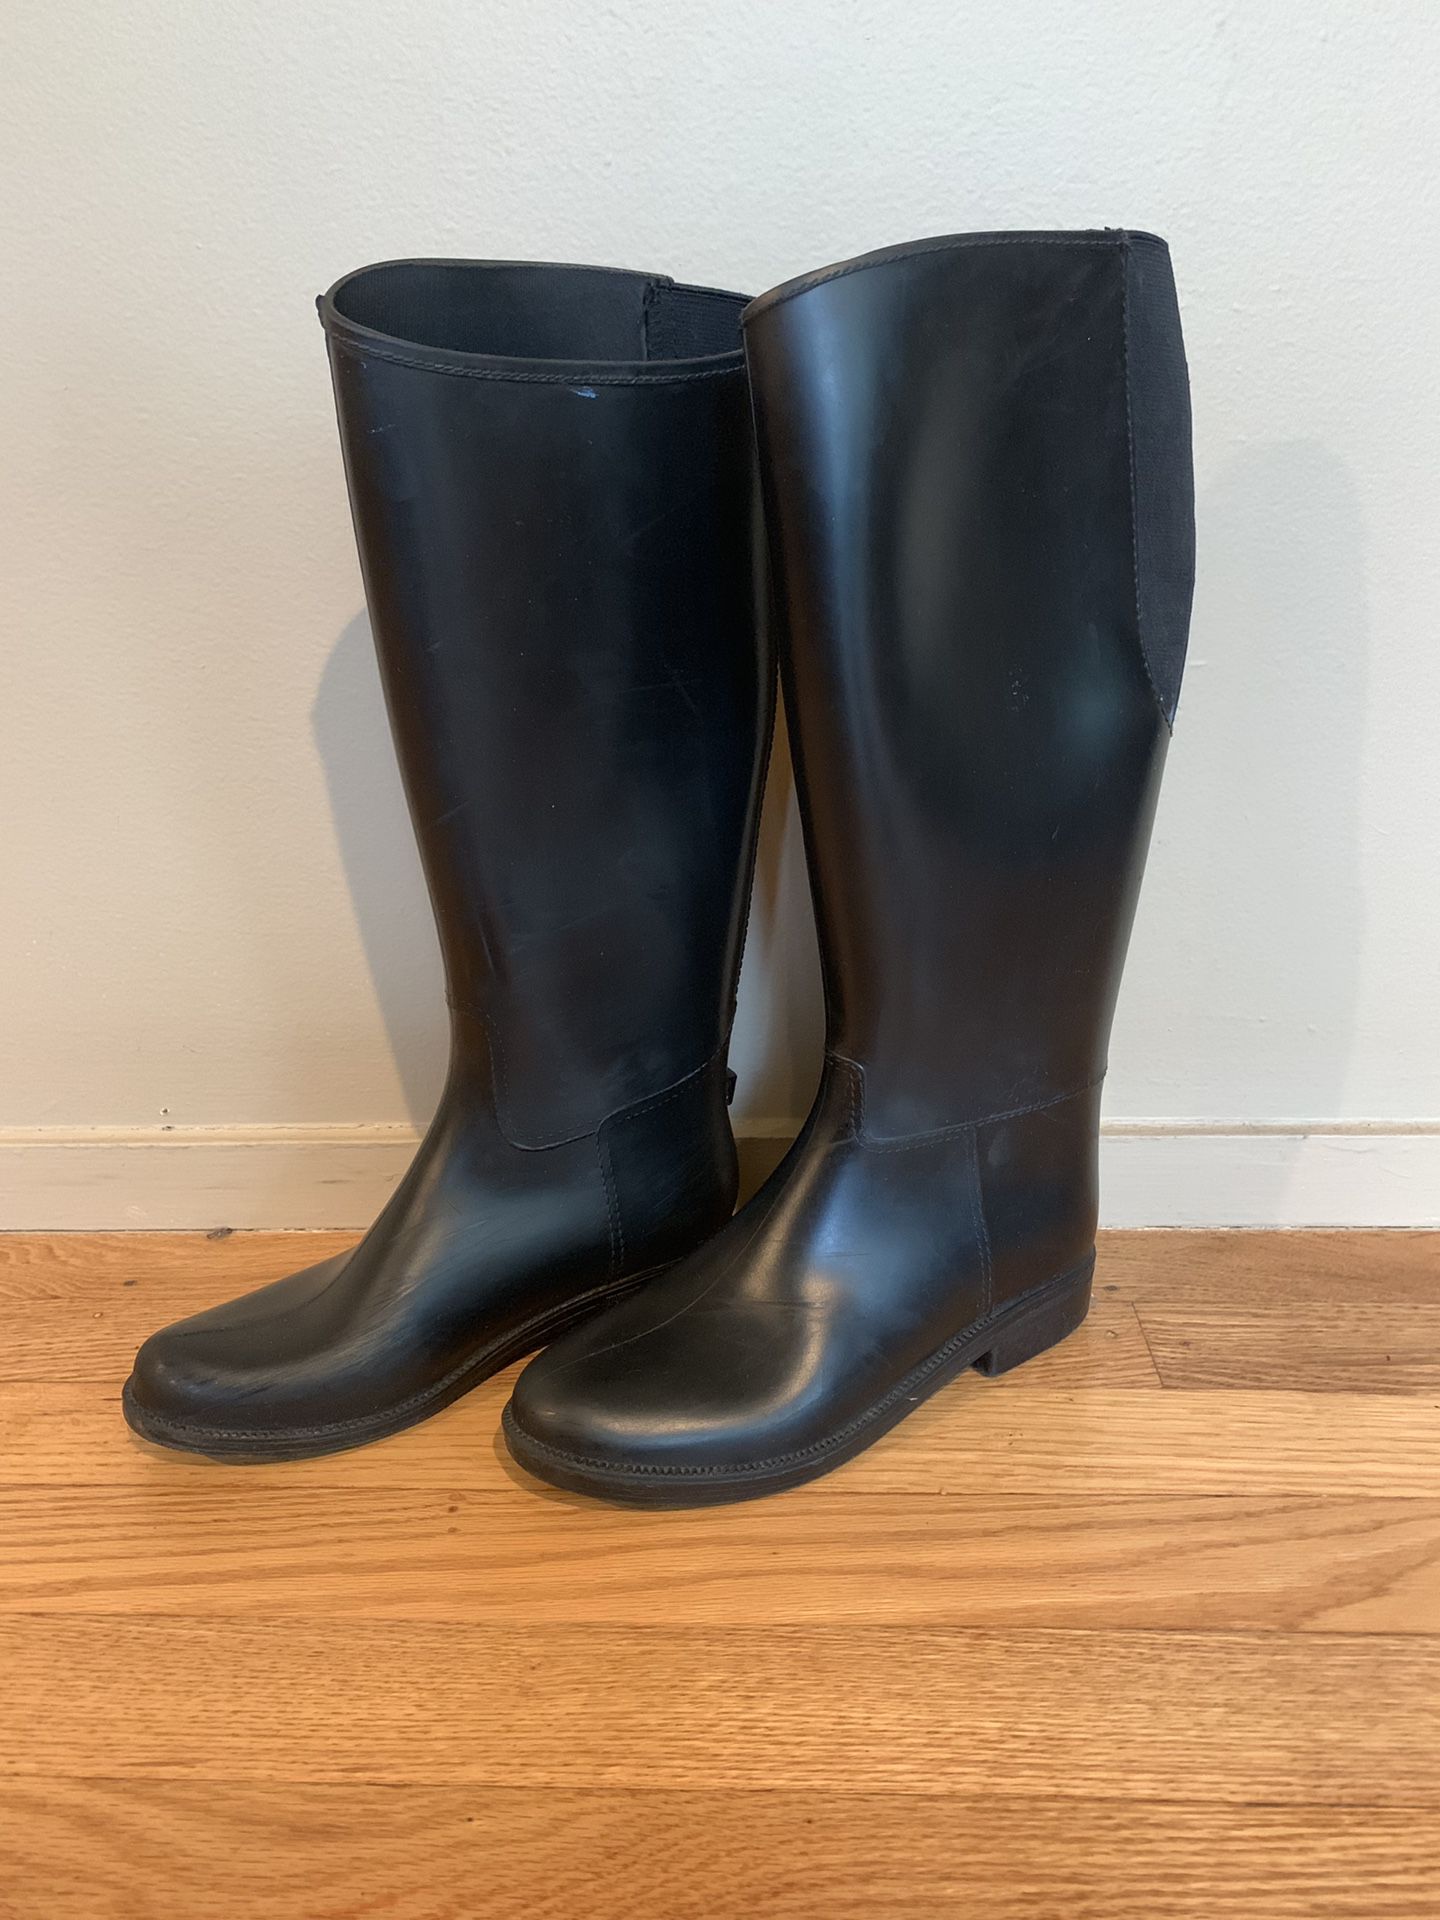 Girls Rubber Riding Boots - US Size 3, Euro 34